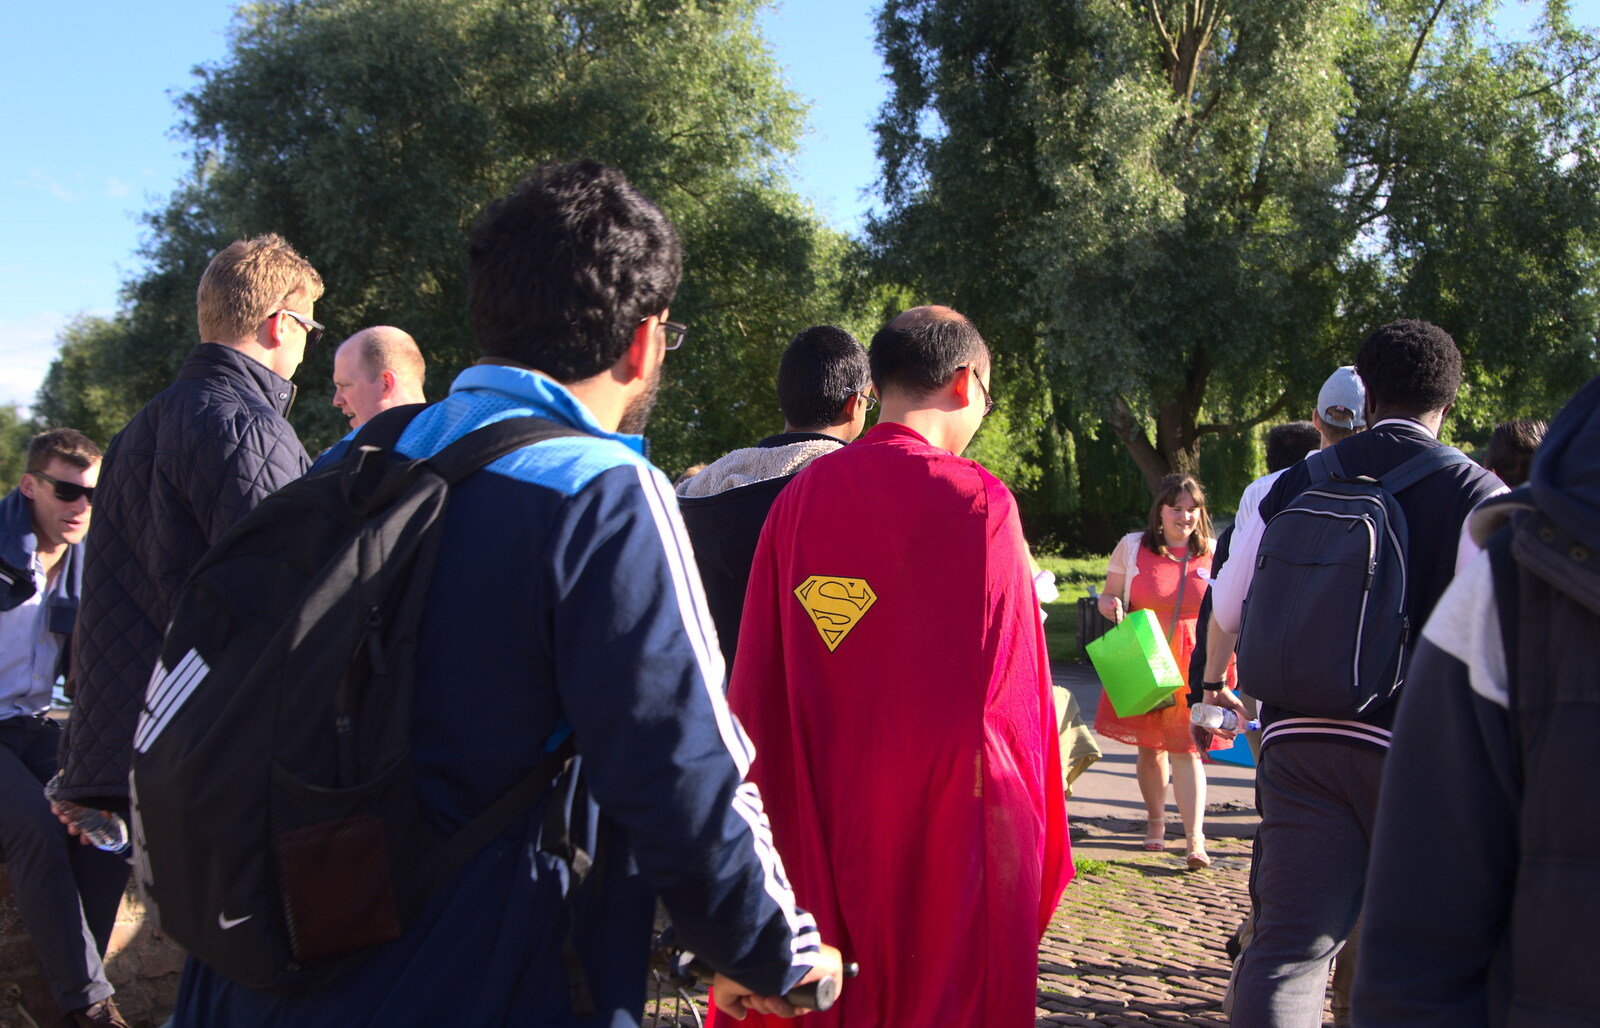 Superman roams around from Back in the 'Bridge: an Anniversary, Cambridge - 3rd July 2016